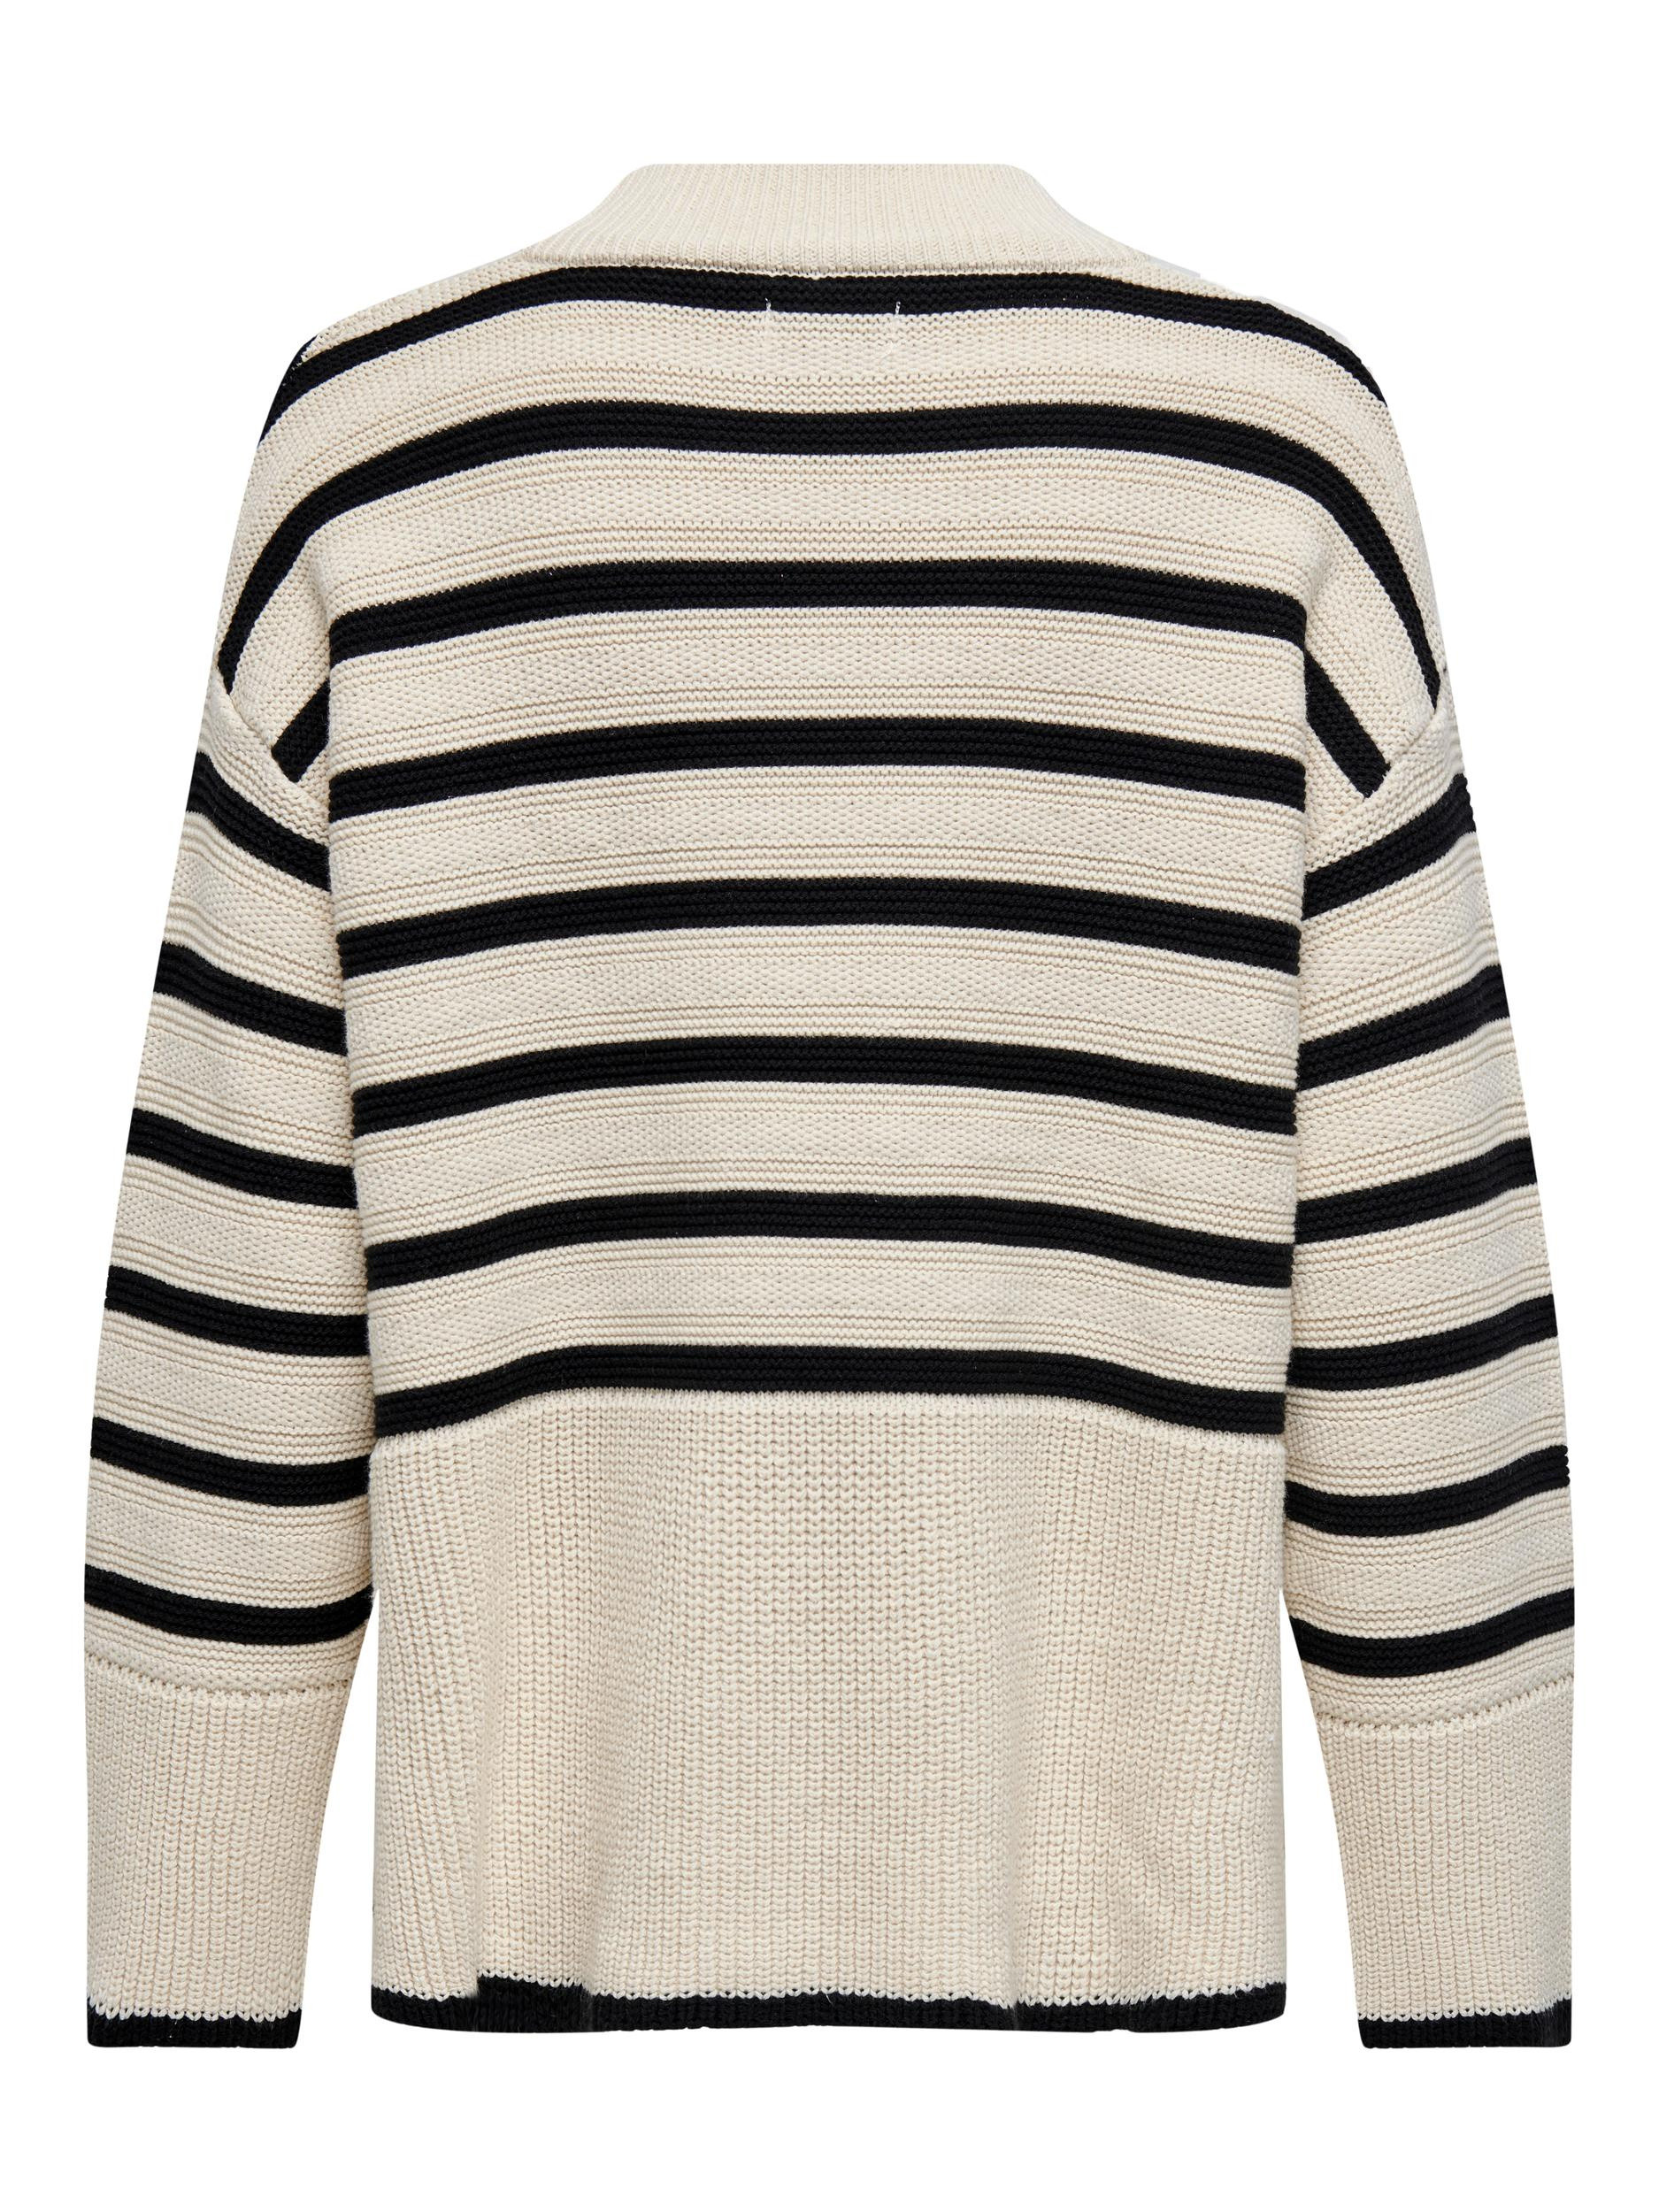 Only - Striped cotton blend sweater, Beige, large image number 1